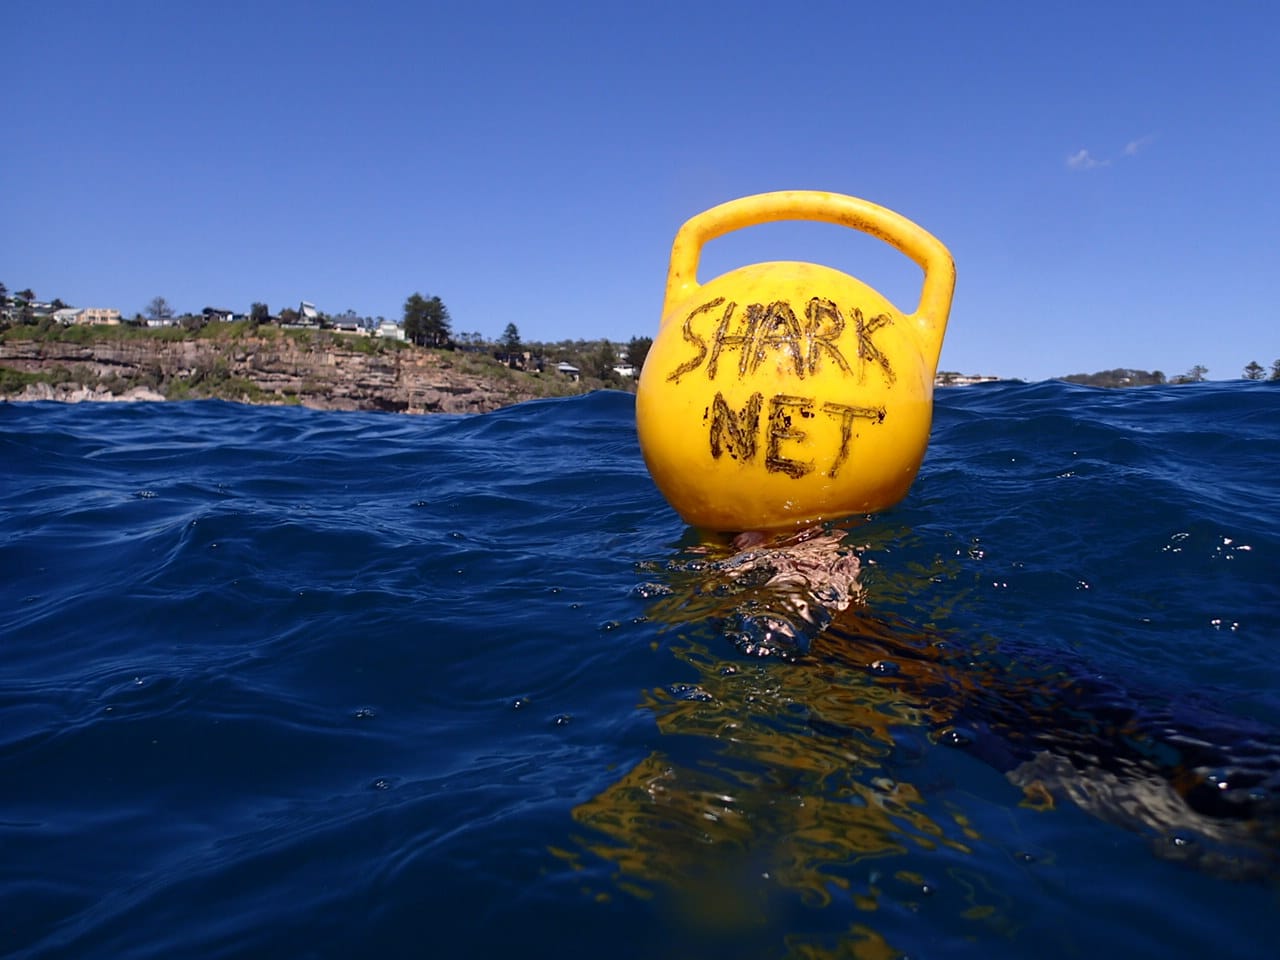 NSW announces new Shark Management Strategy but continues with archaic shark nets